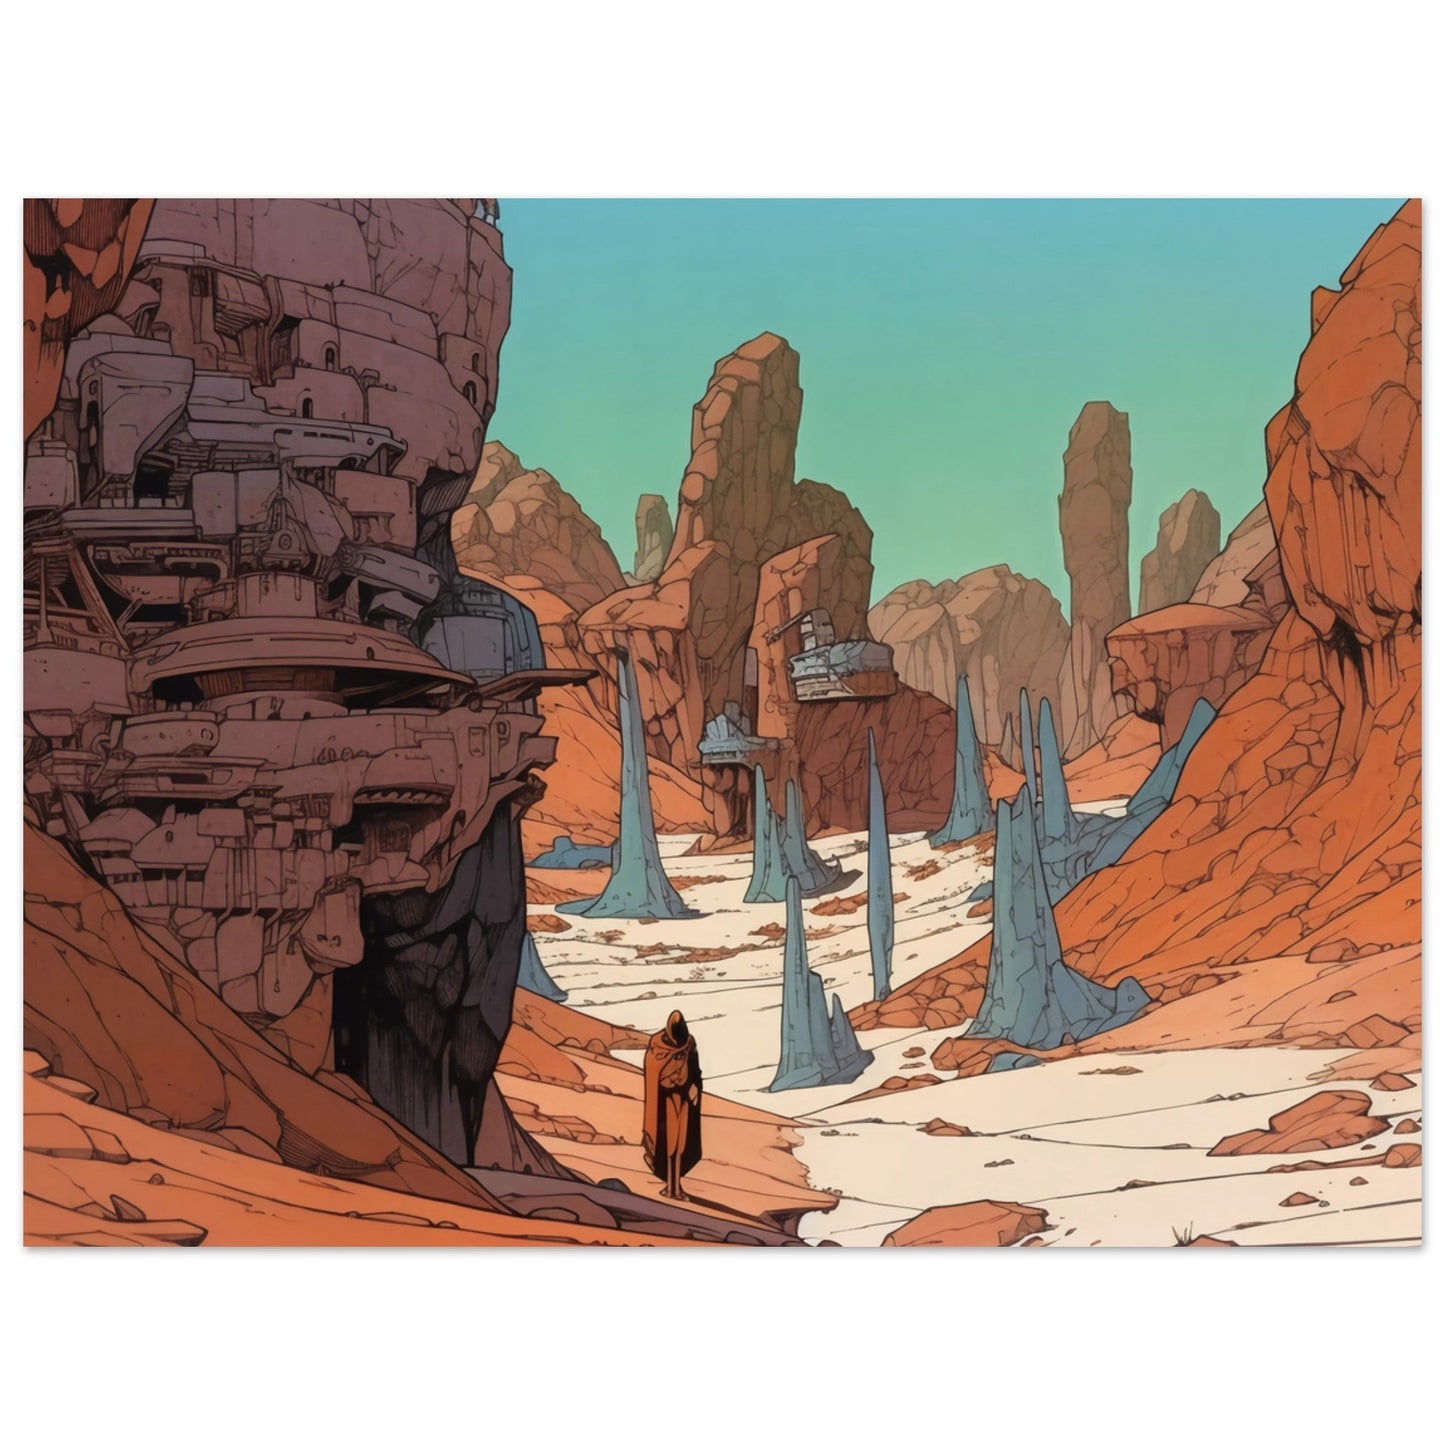 High Quality Poster Wall Art featuring The Young Traveller Returns walking through a desert landscape adorned with rocks. Ideal for decorating rooms.